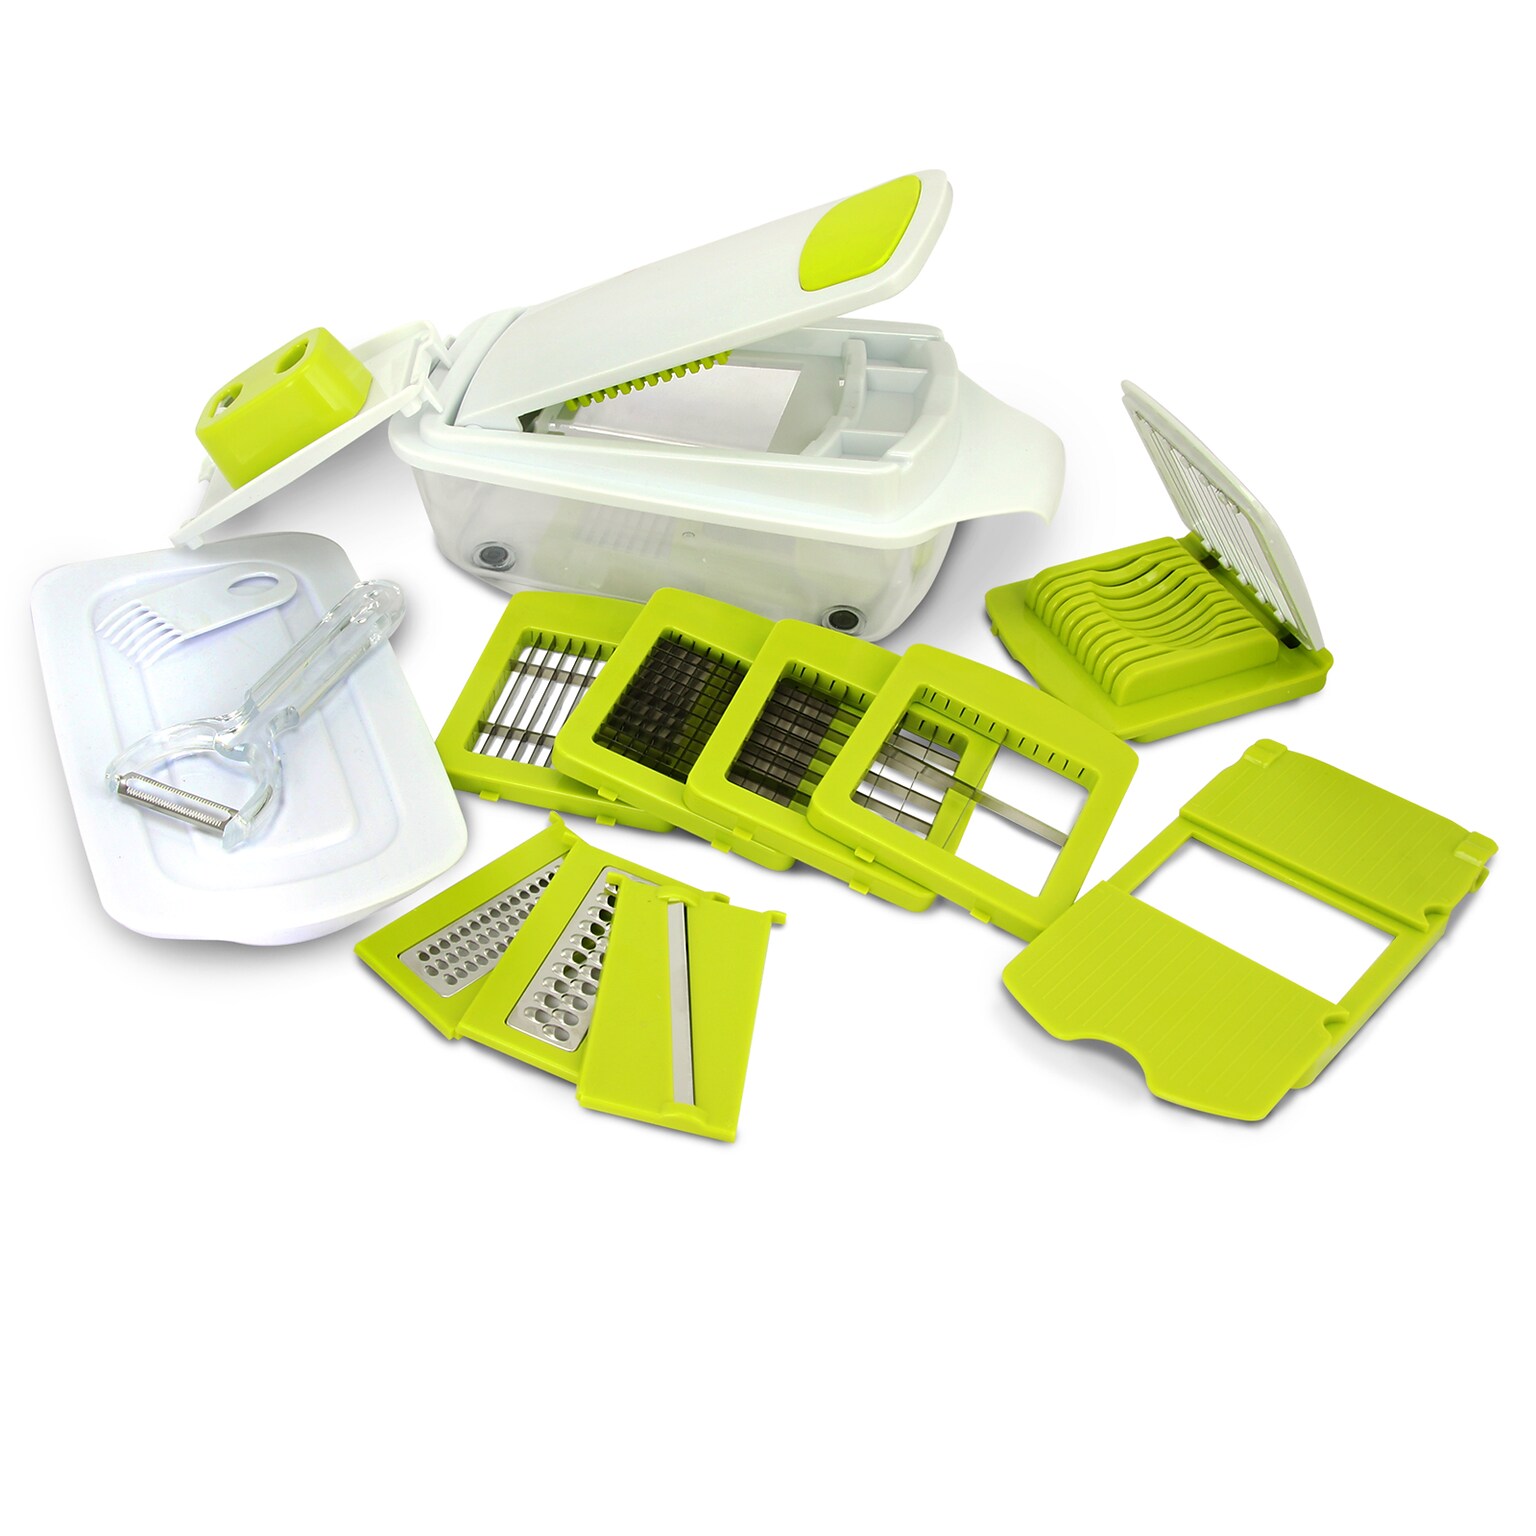 MegaChef 8-in-1 Multi-Use Slicer Dicer and Chopper with Interchangeable Blades (MG-MULTI-SLICER-DICER)